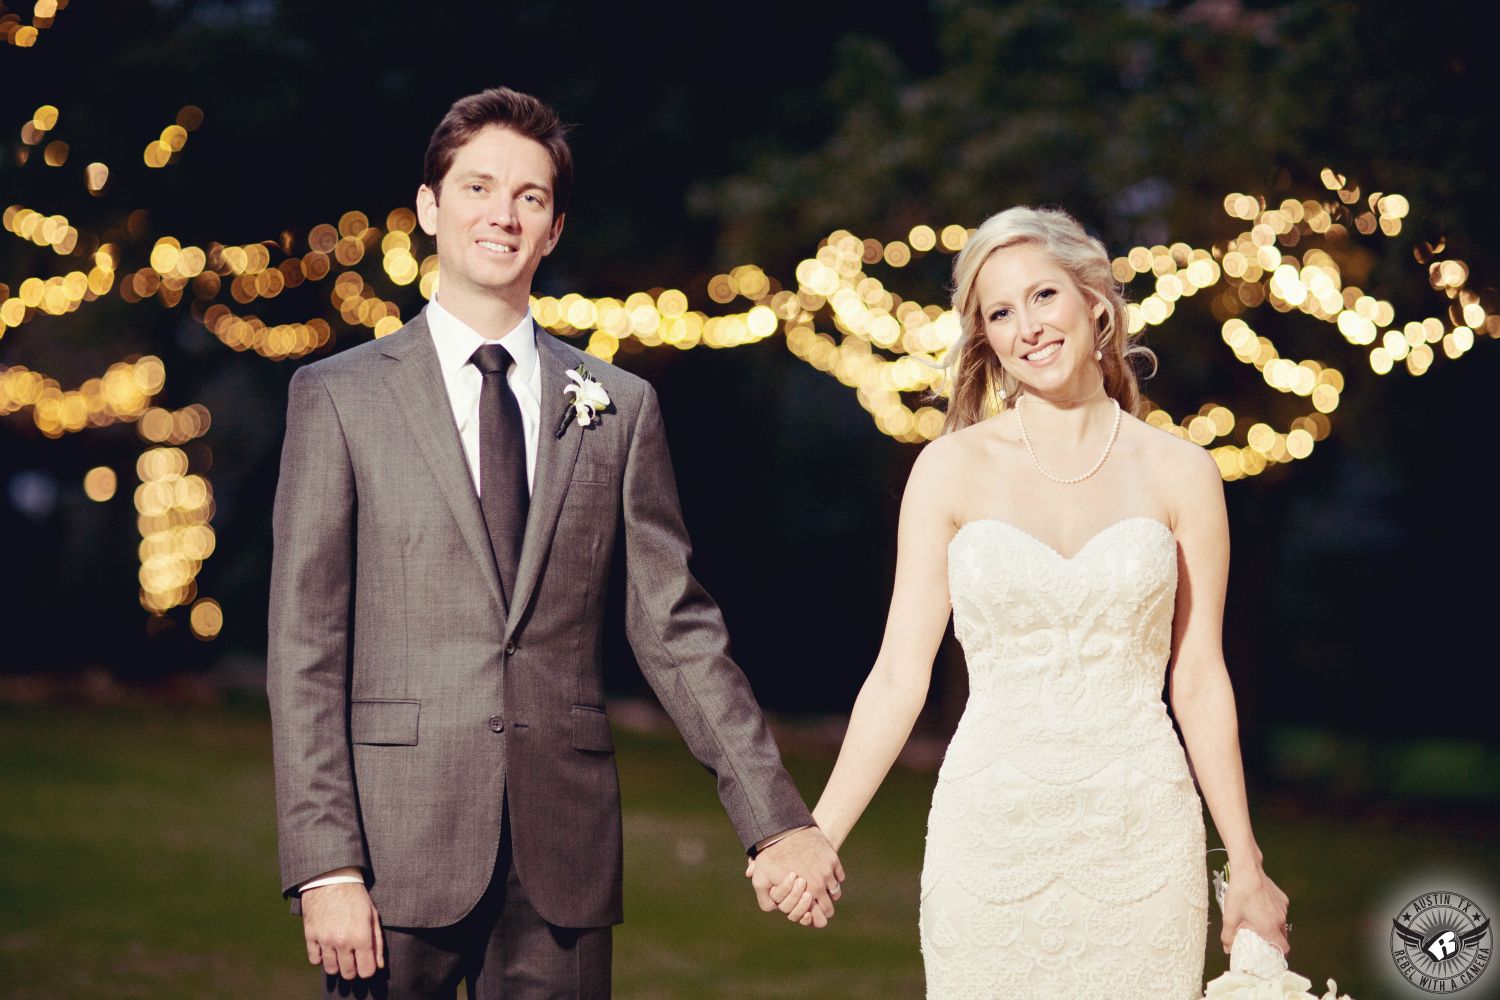 Happy wedding couple holds hands in front of twinkly lights in the trees at Kindred Oaks Austin wedding venue picture taken by Austin wedding photographer.